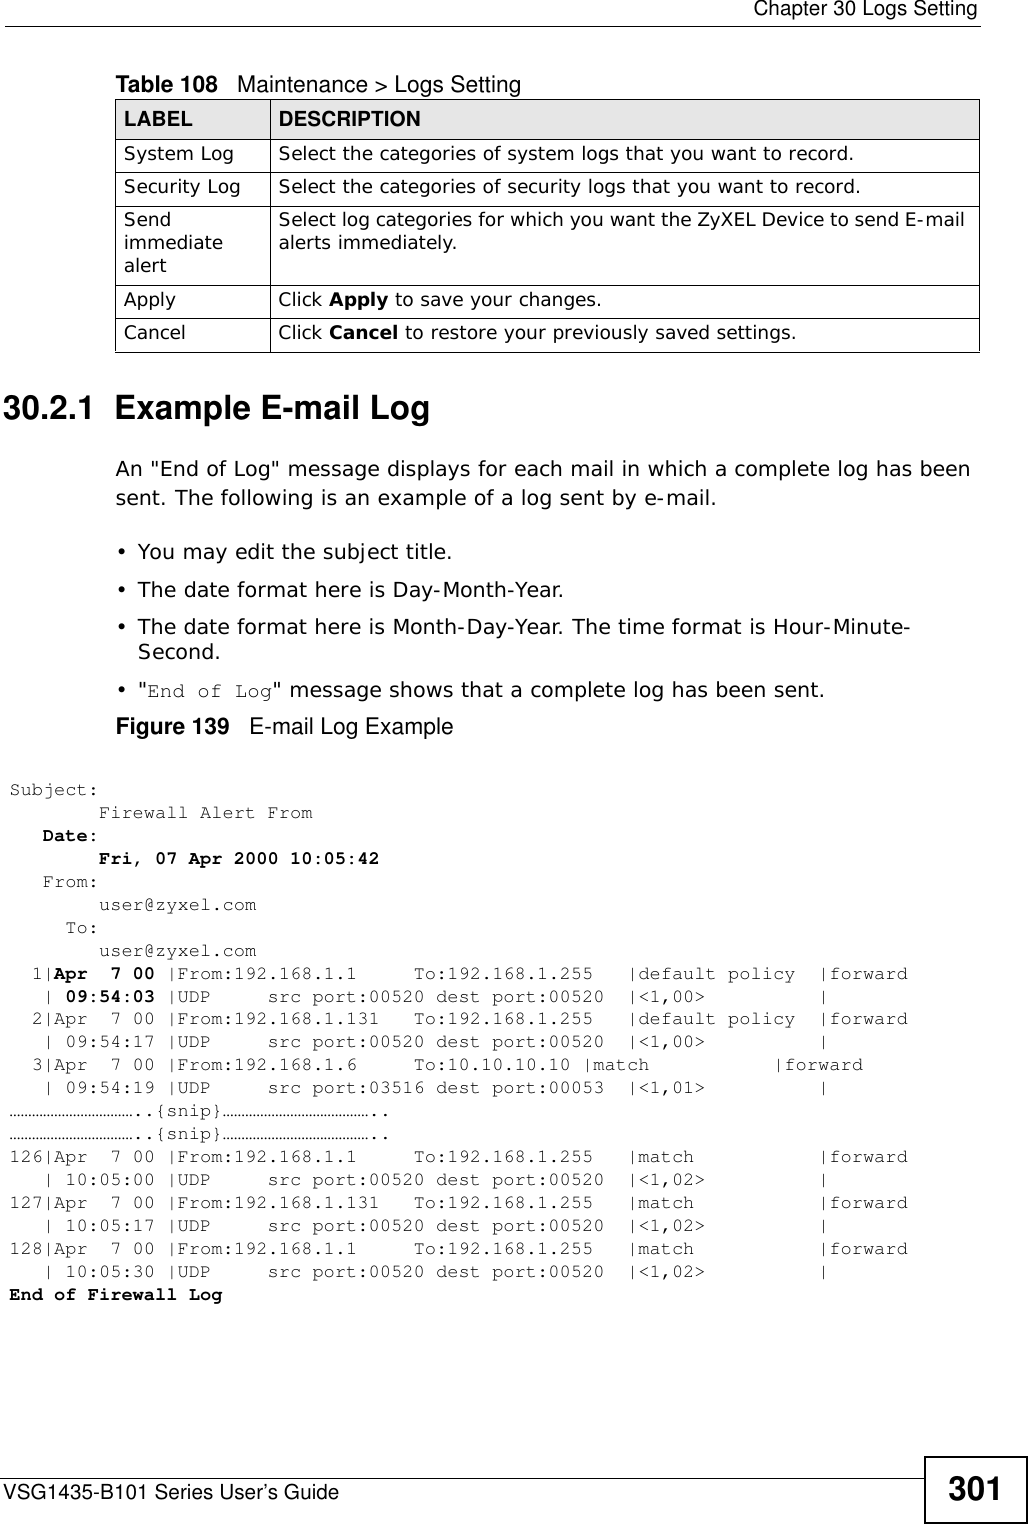  Chapter 30 Logs SettingVSG1435-B101 Series User’s Guide 30130.2.1  Example E-mail LogAn &quot;End of Log&quot; message displays for each mail in which a complete log has been sent. The following is an example of a log sent by e-mail.• You may edit the subject title.• The date format here is Day-Month-Year.• The date format here is Month-Day-Year. The time format is Hour-Minute-Second.•&quot;End of Log&quot; message shows that a complete log has been sent.Figure 139   E-mail Log ExampleSystem Log Select the categories of system logs that you want to record.Security Log Select the categories of security logs that you want to record.Send immediate alert Select log categories for which you want the ZyXEL Device to send E-mail alerts immediately. Apply Click Apply to save your changes.Cancel Click Cancel to restore your previously saved settings.Table 108   Maintenance &gt; Logs SettingLABEL DESCRIPTIONSubject:         Firewall Alert From    Date:         Fri, 07 Apr 2000 10:05:42   From:         user@zyxel.com     To:         user@zyxel.com  1|Apr  7 00 |From:192.168.1.1     To:192.168.1.255   |default policy  |forward   | 09:54:03 |UDP     src port:00520 dest port:00520  |&lt;1,00&gt;          |         2|Apr  7 00 |From:192.168.1.131   To:192.168.1.255   |default policy  |forward   | 09:54:17 |UDP     src port:00520 dest port:00520  |&lt;1,00&gt;          |         3|Apr  7 00 |From:192.168.1.6     To:10.10.10.10 |match           |forward   | 09:54:19 |UDP     src port:03516 dest port:00053  |&lt;1,01&gt;          |       ……………………………..{snip}…………………………………..……………………………..{snip}…………………………………..126|Apr  7 00 |From:192.168.1.1     To:192.168.1.255   |match           |forward   | 10:05:00 |UDP     src port:00520 dest port:00520  |&lt;1,02&gt;          |       127|Apr  7 00 |From:192.168.1.131   To:192.168.1.255   |match           |forward   | 10:05:17 |UDP     src port:00520 dest port:00520  |&lt;1,02&gt;          |       128|Apr  7 00 |From:192.168.1.1     To:192.168.1.255   |match           |forward   | 10:05:30 |UDP     src port:00520 dest port:00520  |&lt;1,02&gt;          |       End of Firewall Log